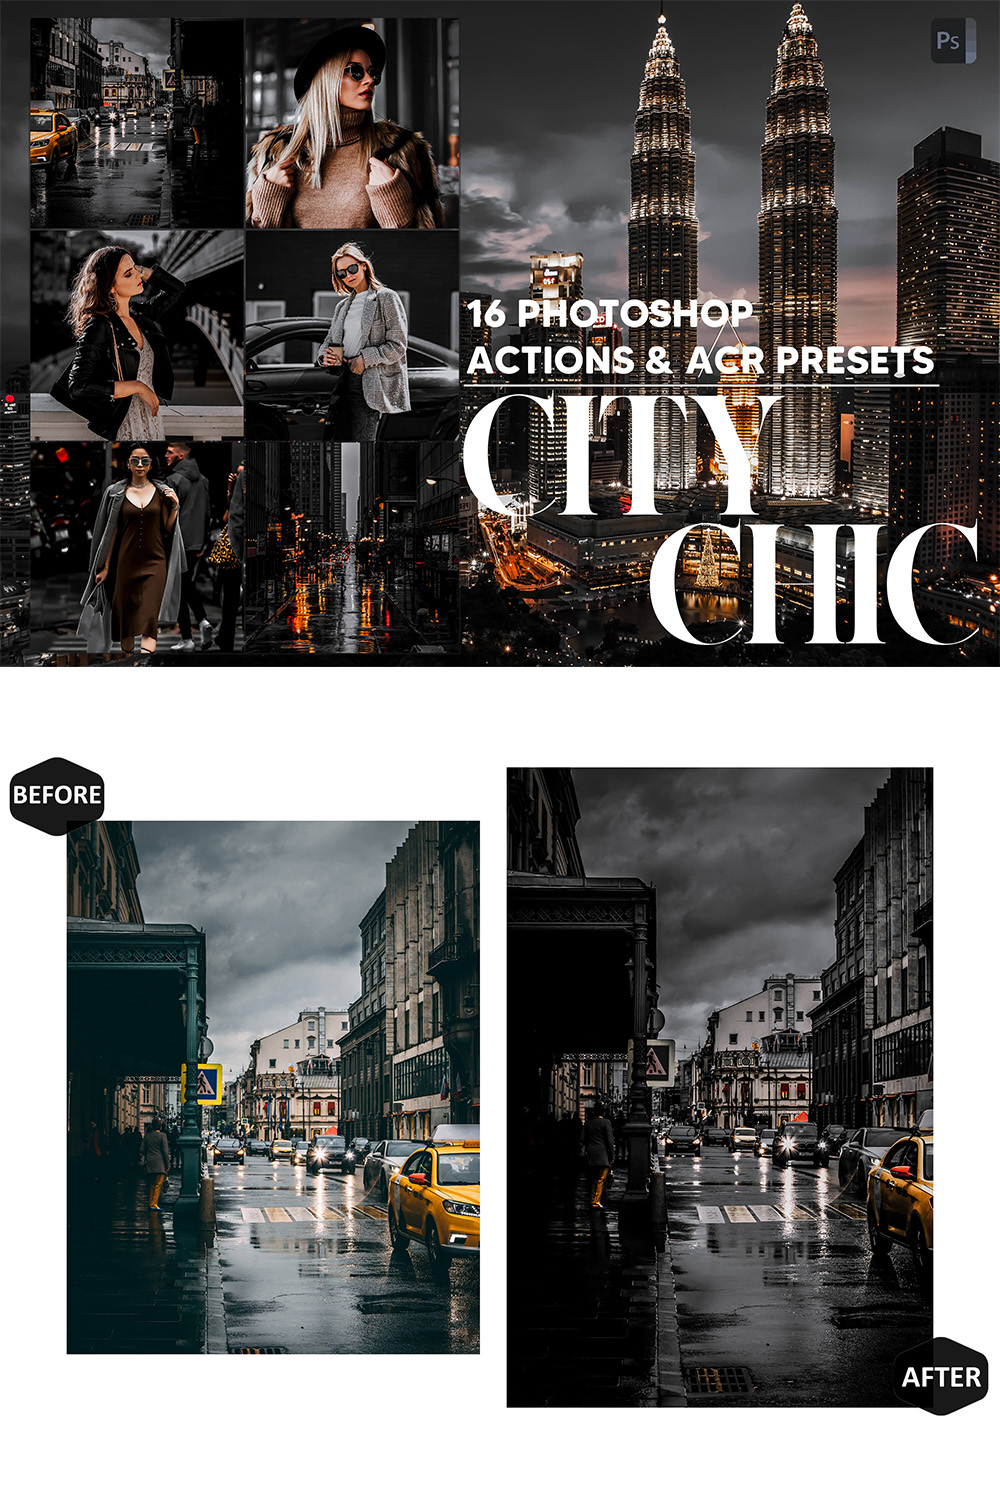 16 Photoshop Actions, City Chic Ps Action, Moody Urban ACR Preset, Town Ps Filter, Atn Portrait And Lifestyle Theme For Instagram, Blogger pinterest preview image.